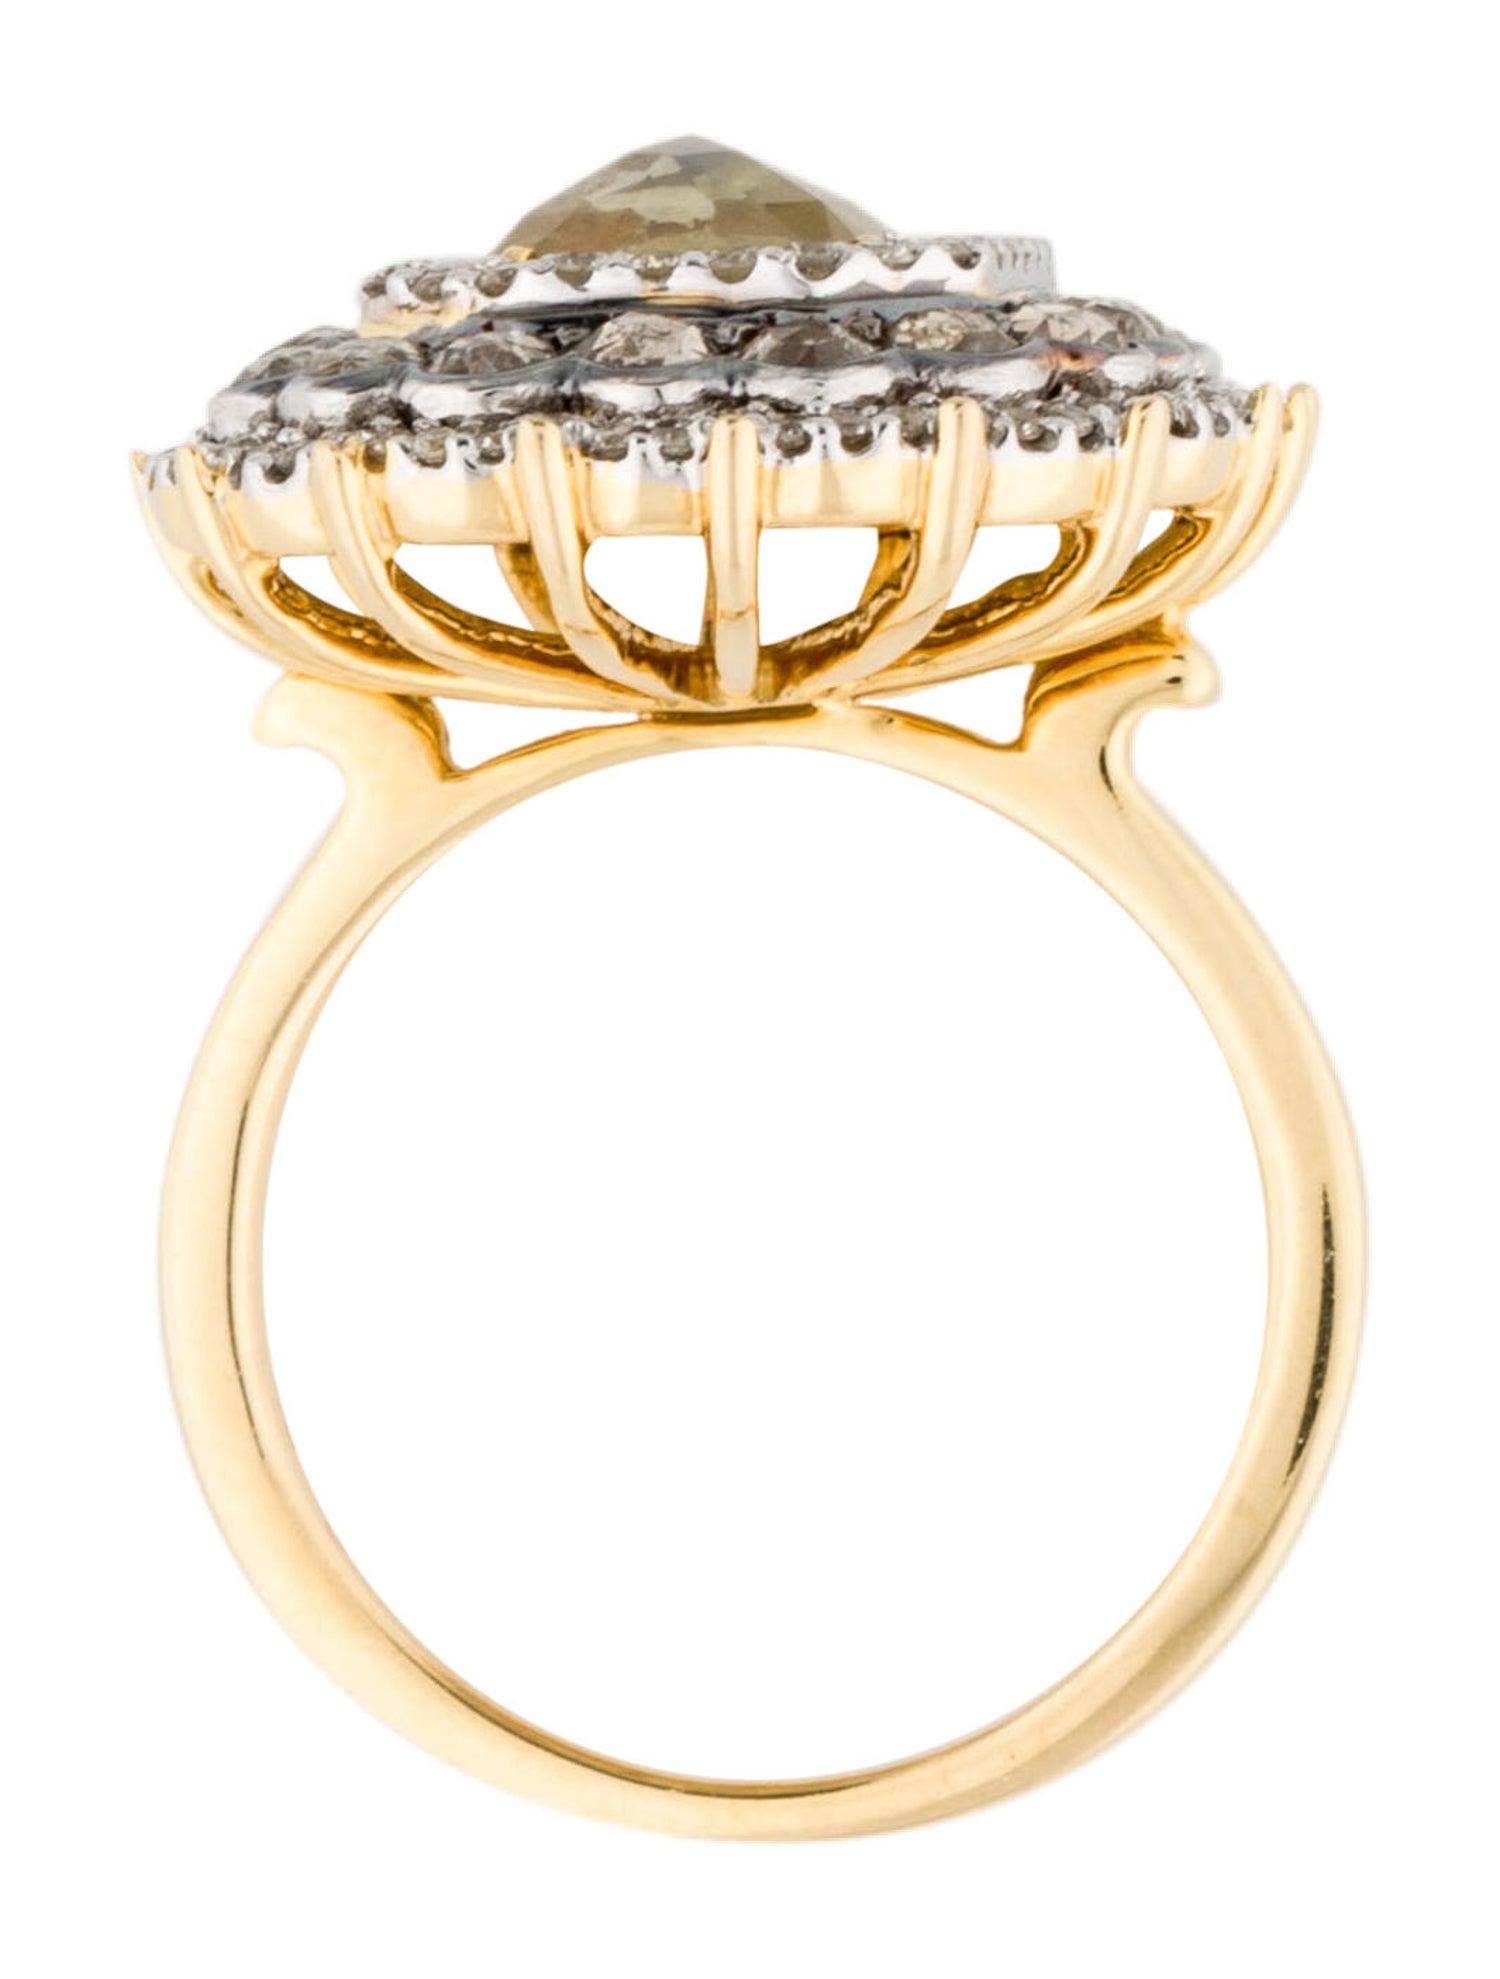 Mixed Cut 14Kt Yellow Gold 4.25ct Diamond Cocktail Ring For Sale